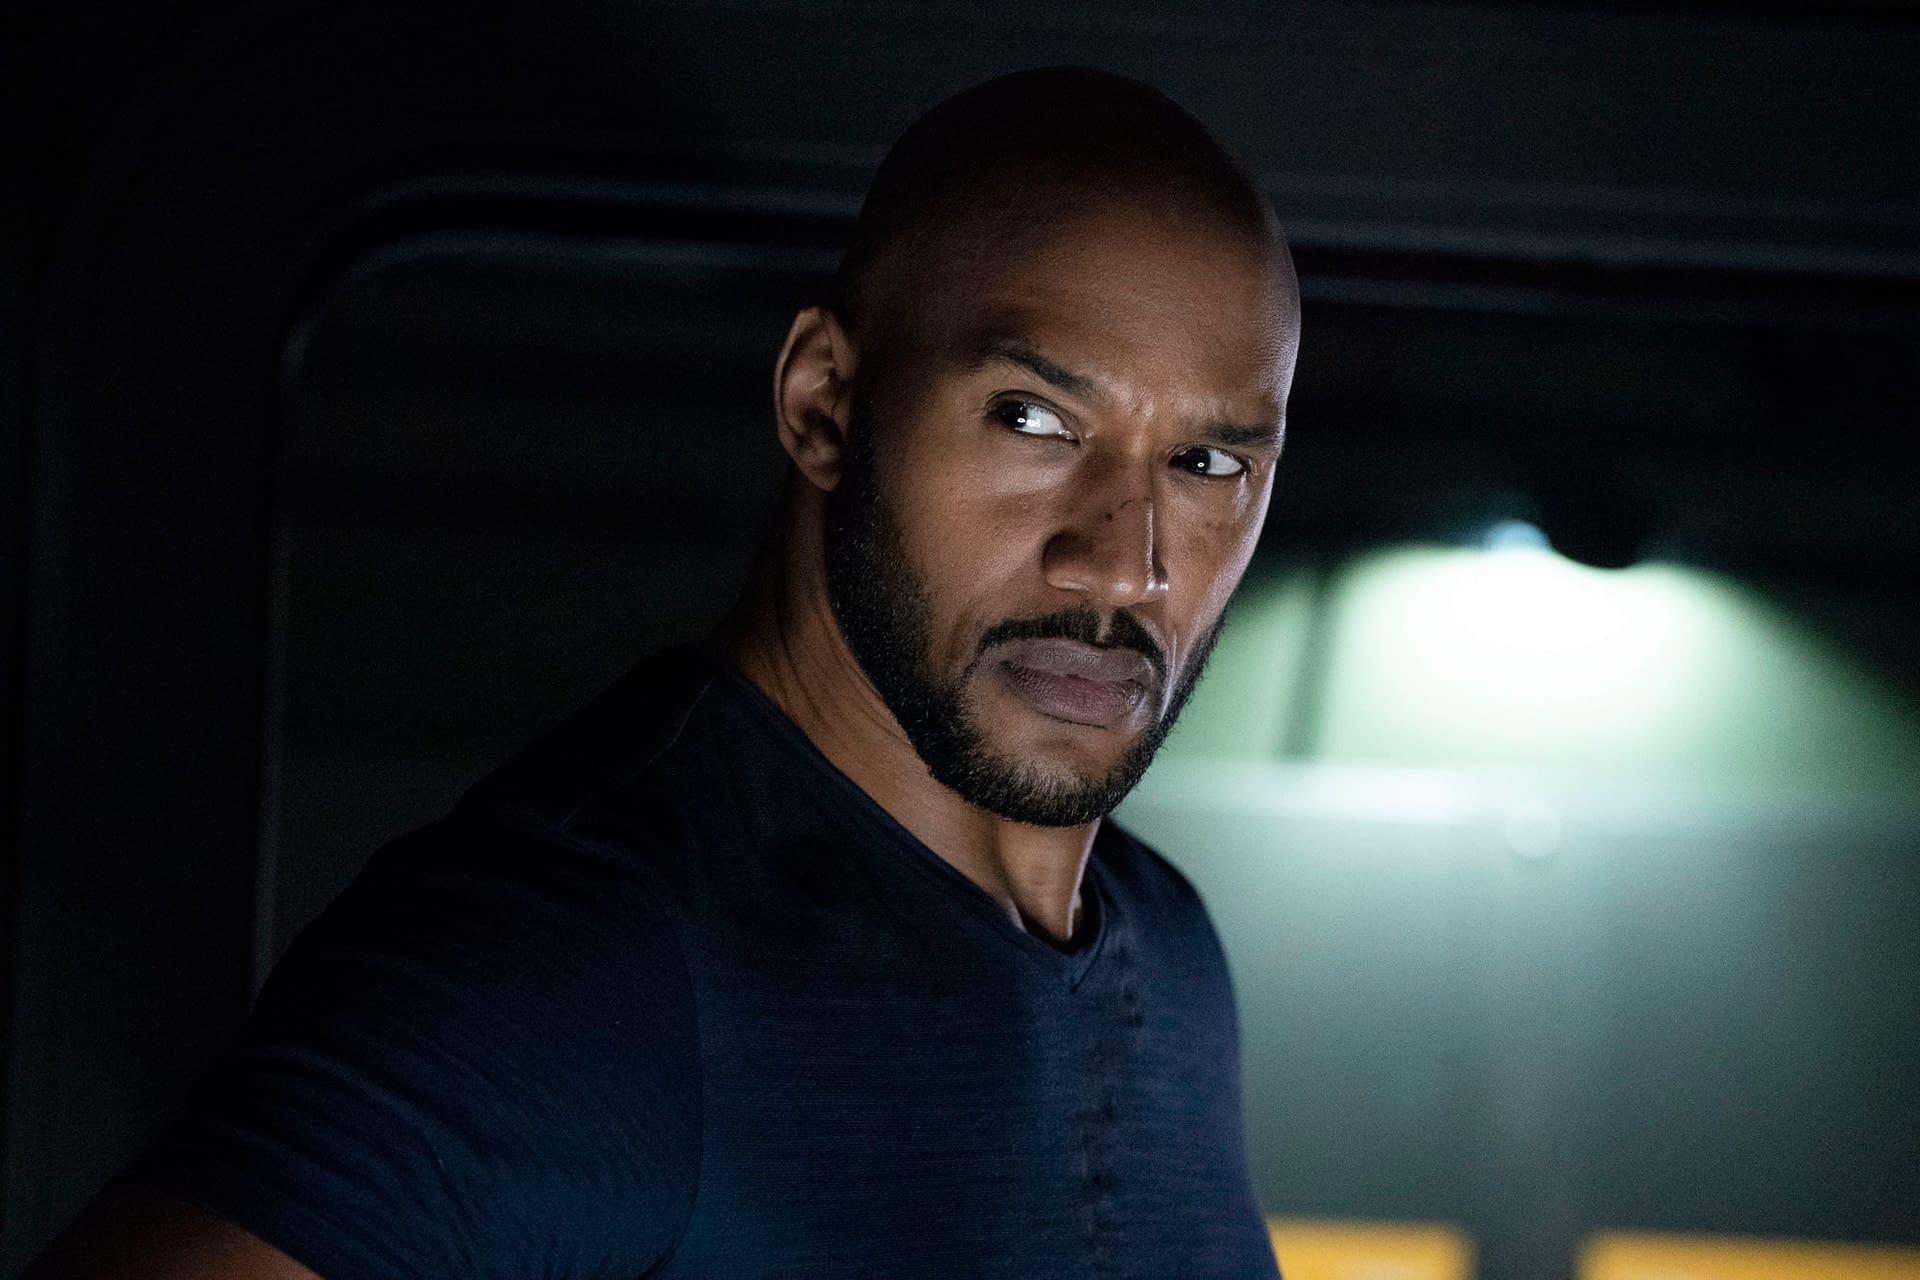 MARVEL'S AGENTS OF S.H.I.E.L.D. on ABC